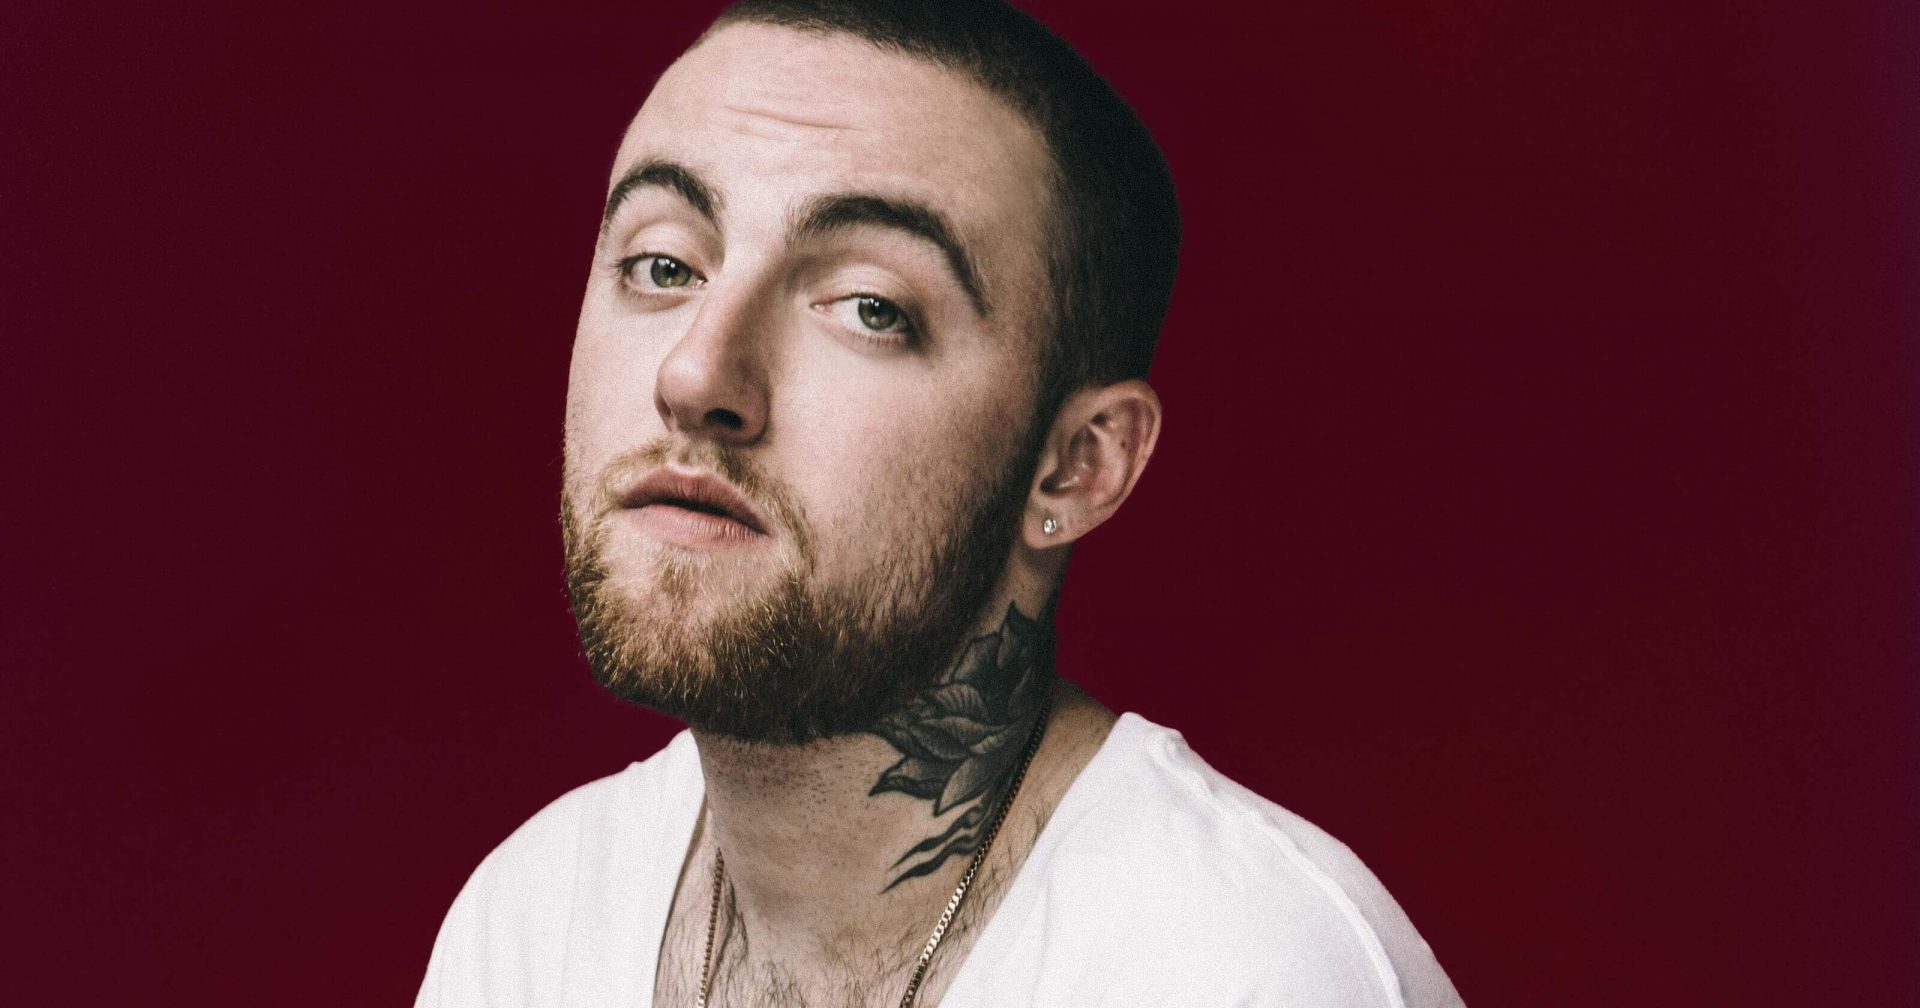 Drake, Post Malone, Chance The Rapper pay tribute to Mac Miller, dead at 26